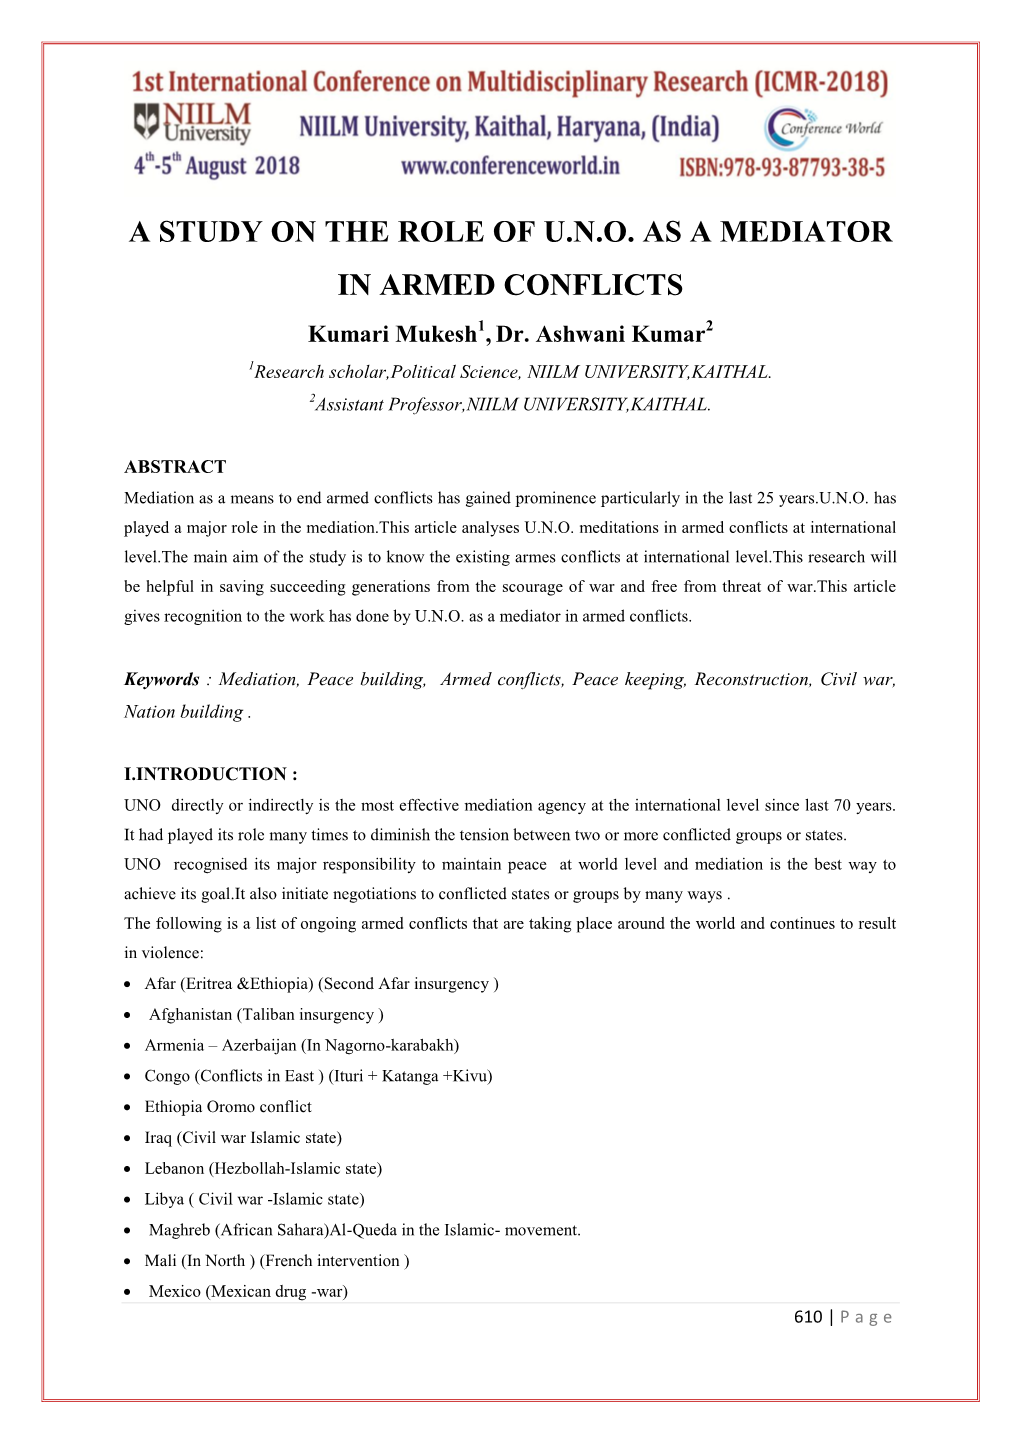 A Study on the Role of U.N.O. As a Mediator in Armed Conflicts